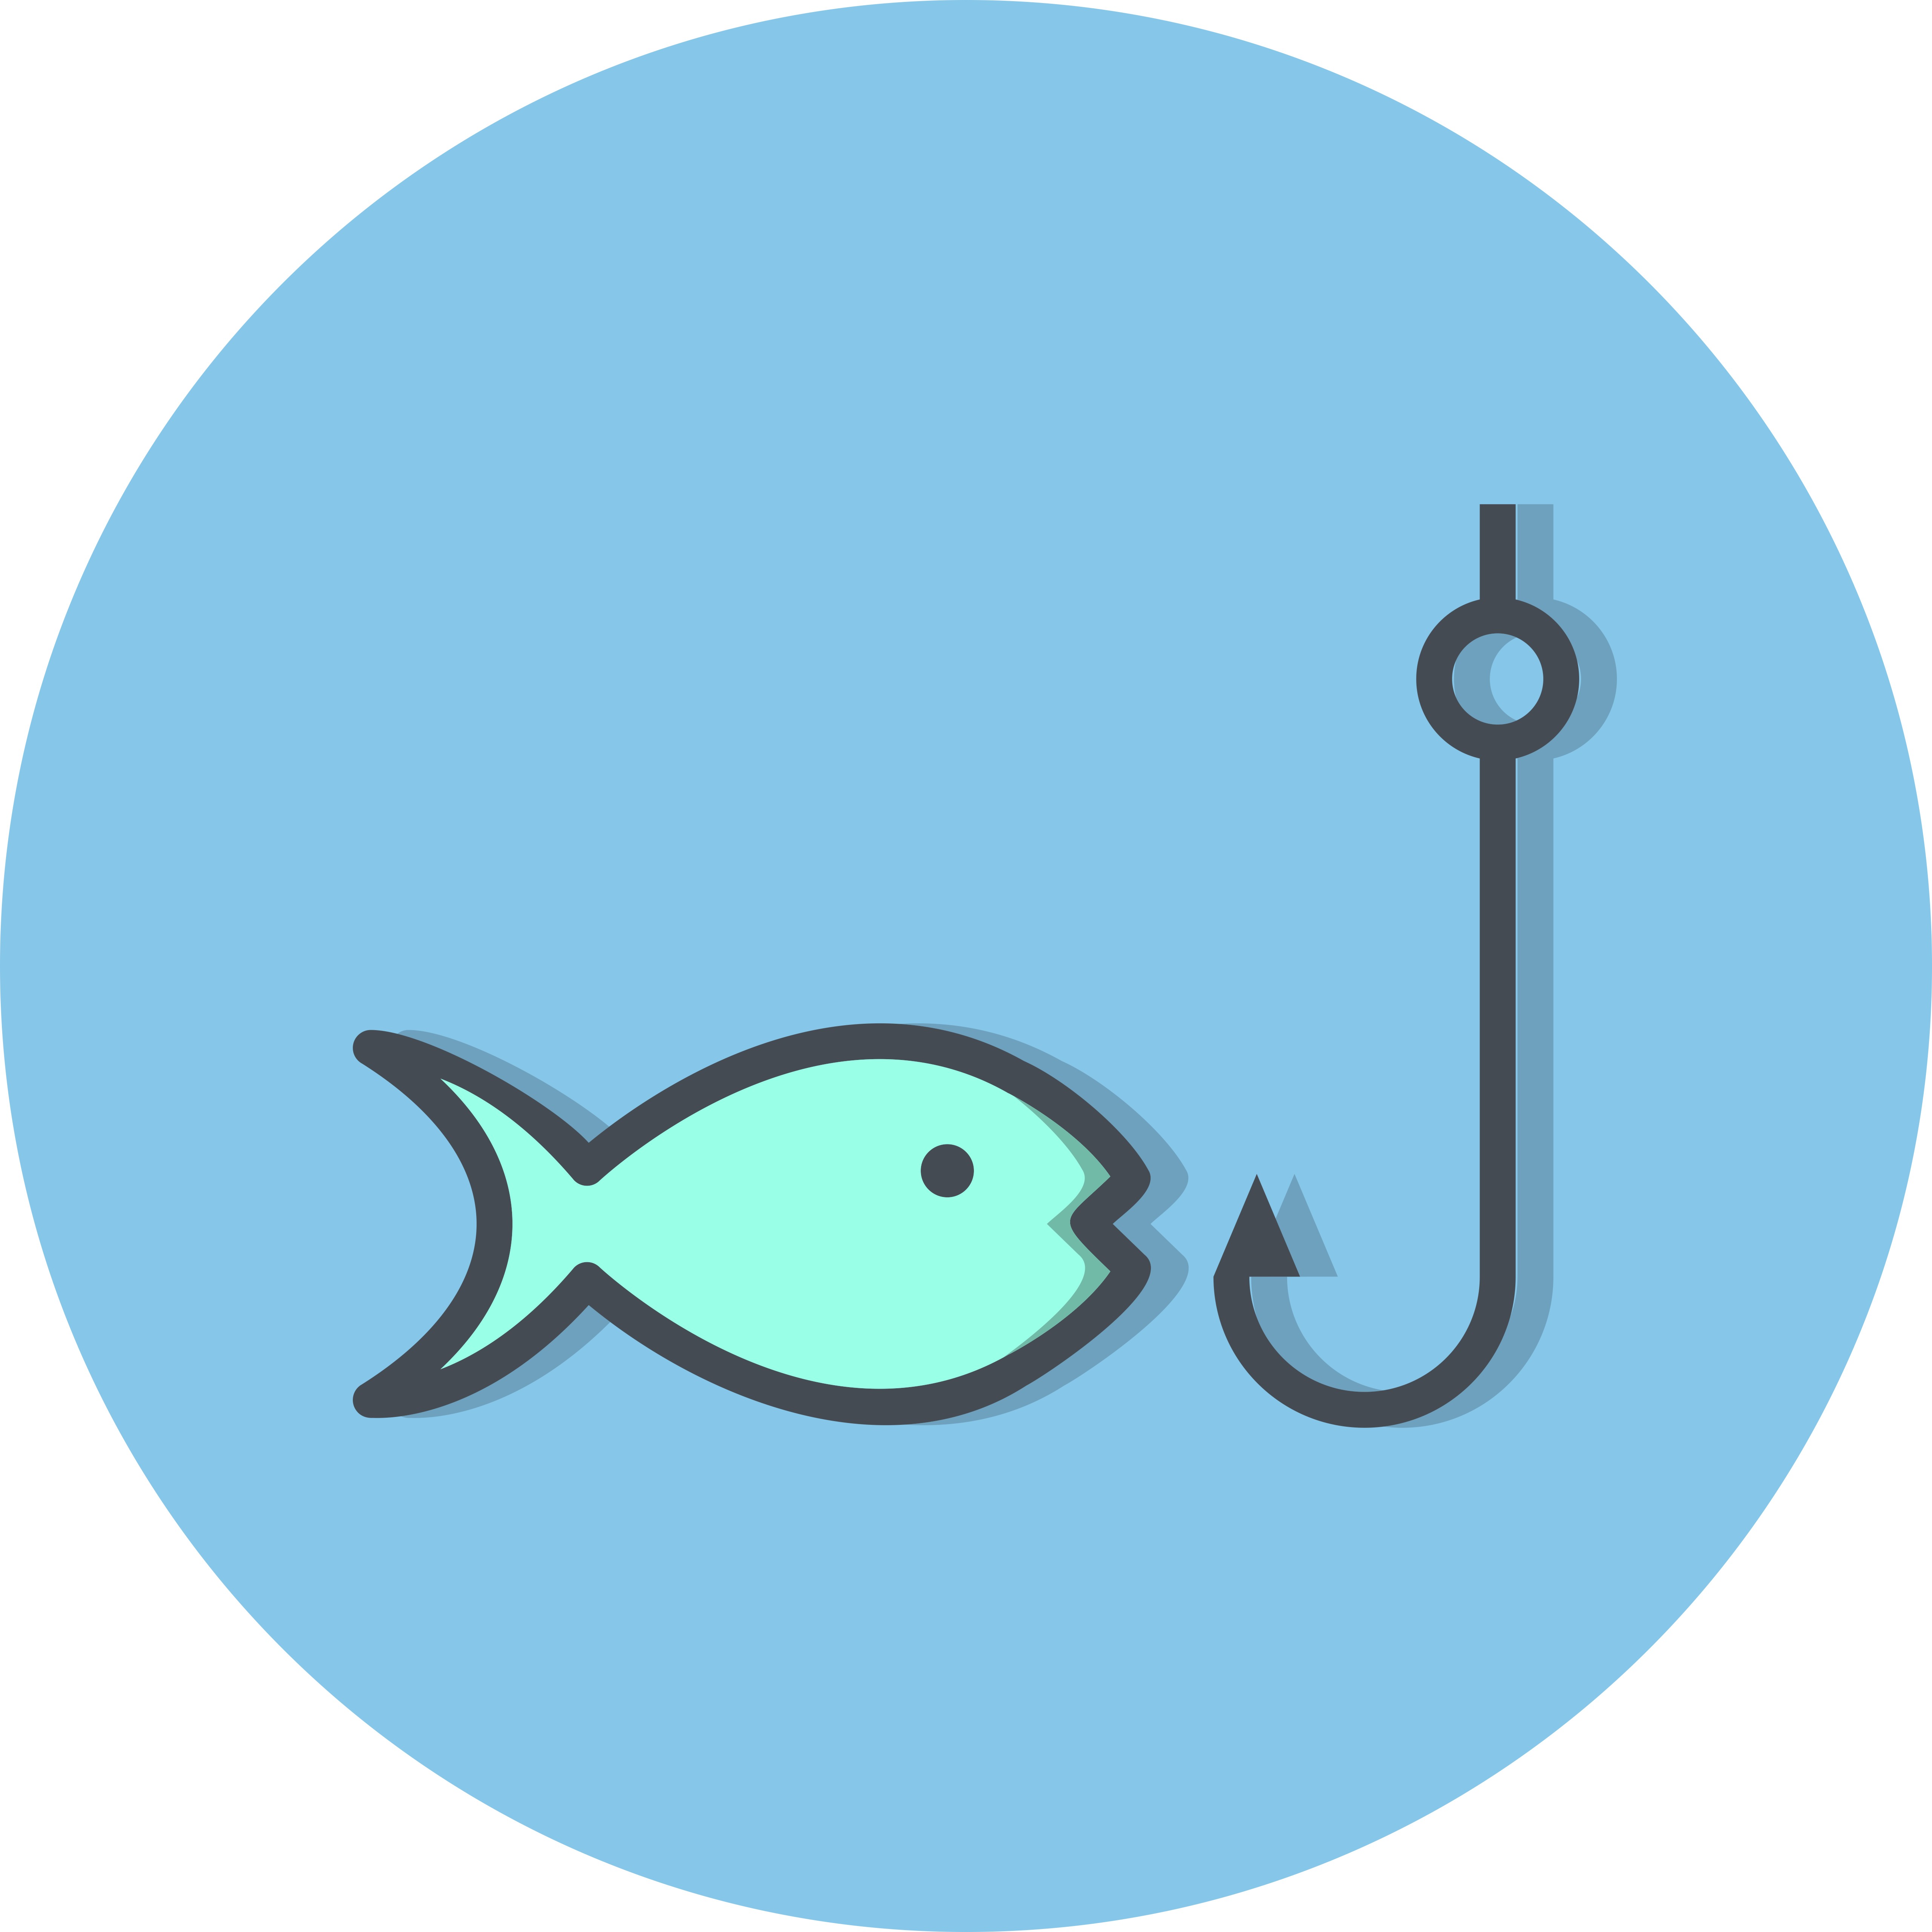 Fishing Vector Icon - Download Free Vectors, Clipart ...